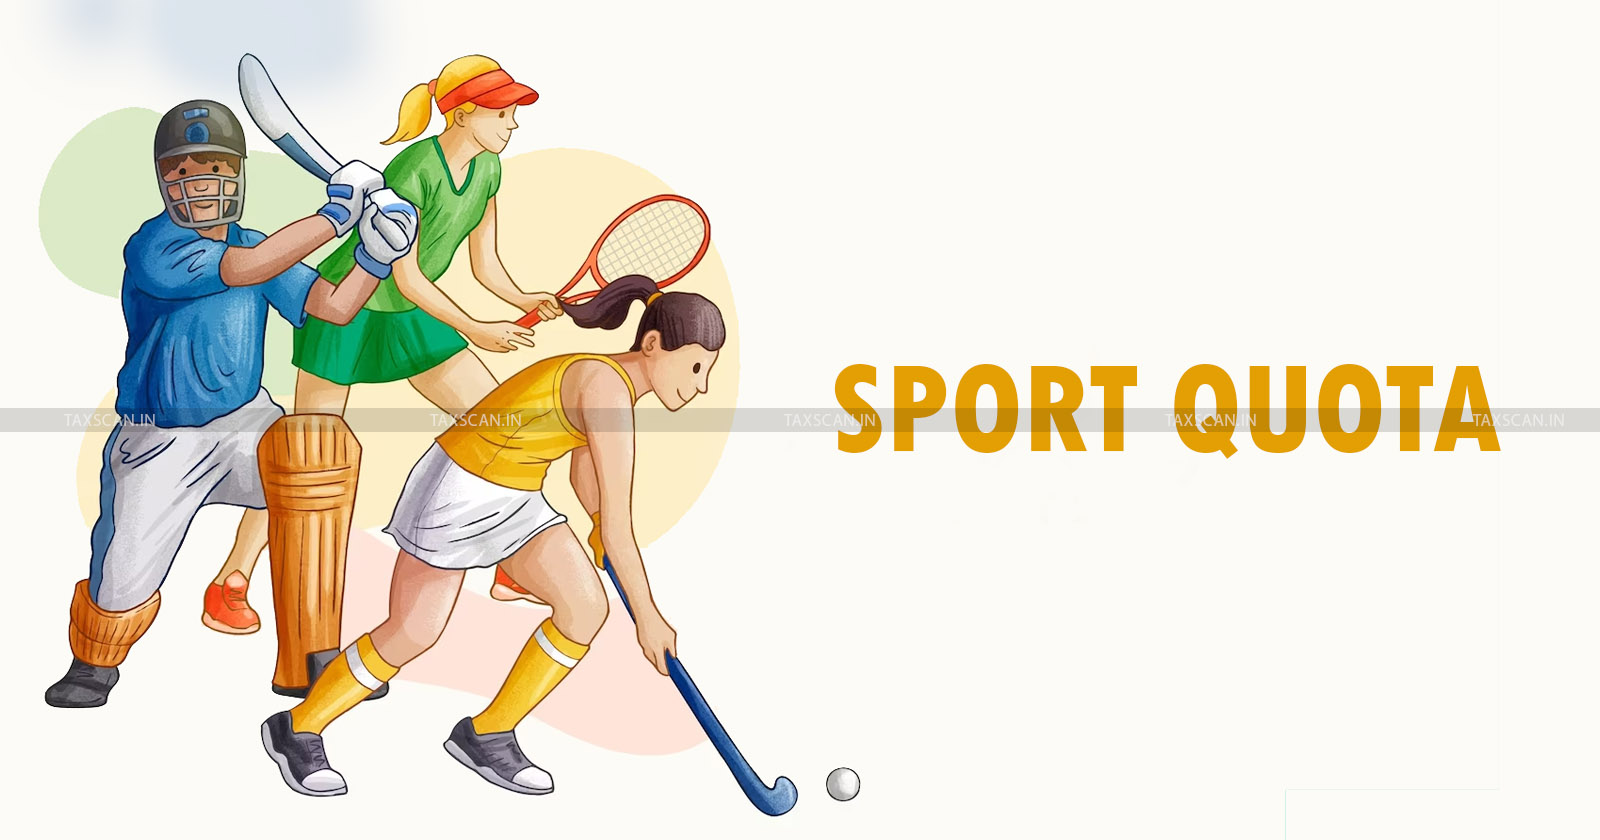 Employment based on Sport Quota - Income Tax Dept - Sport Quota - Supreme Court - NOC - Accommodation of Candidate - taxscan